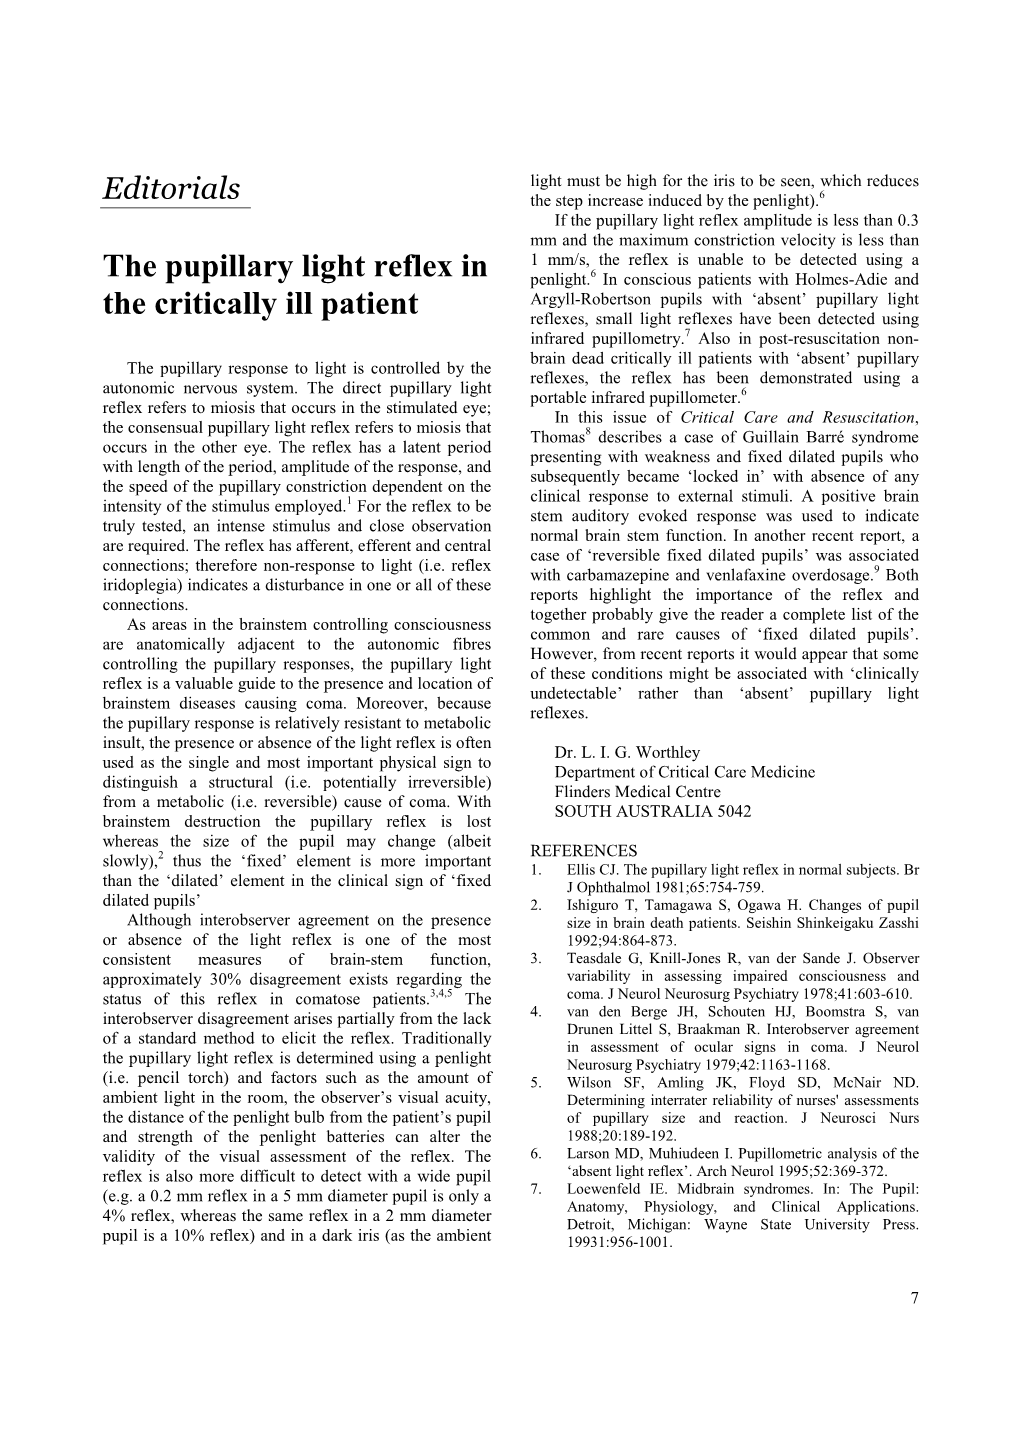 The Pupillary Light Reflex in the Critically Ill Patient